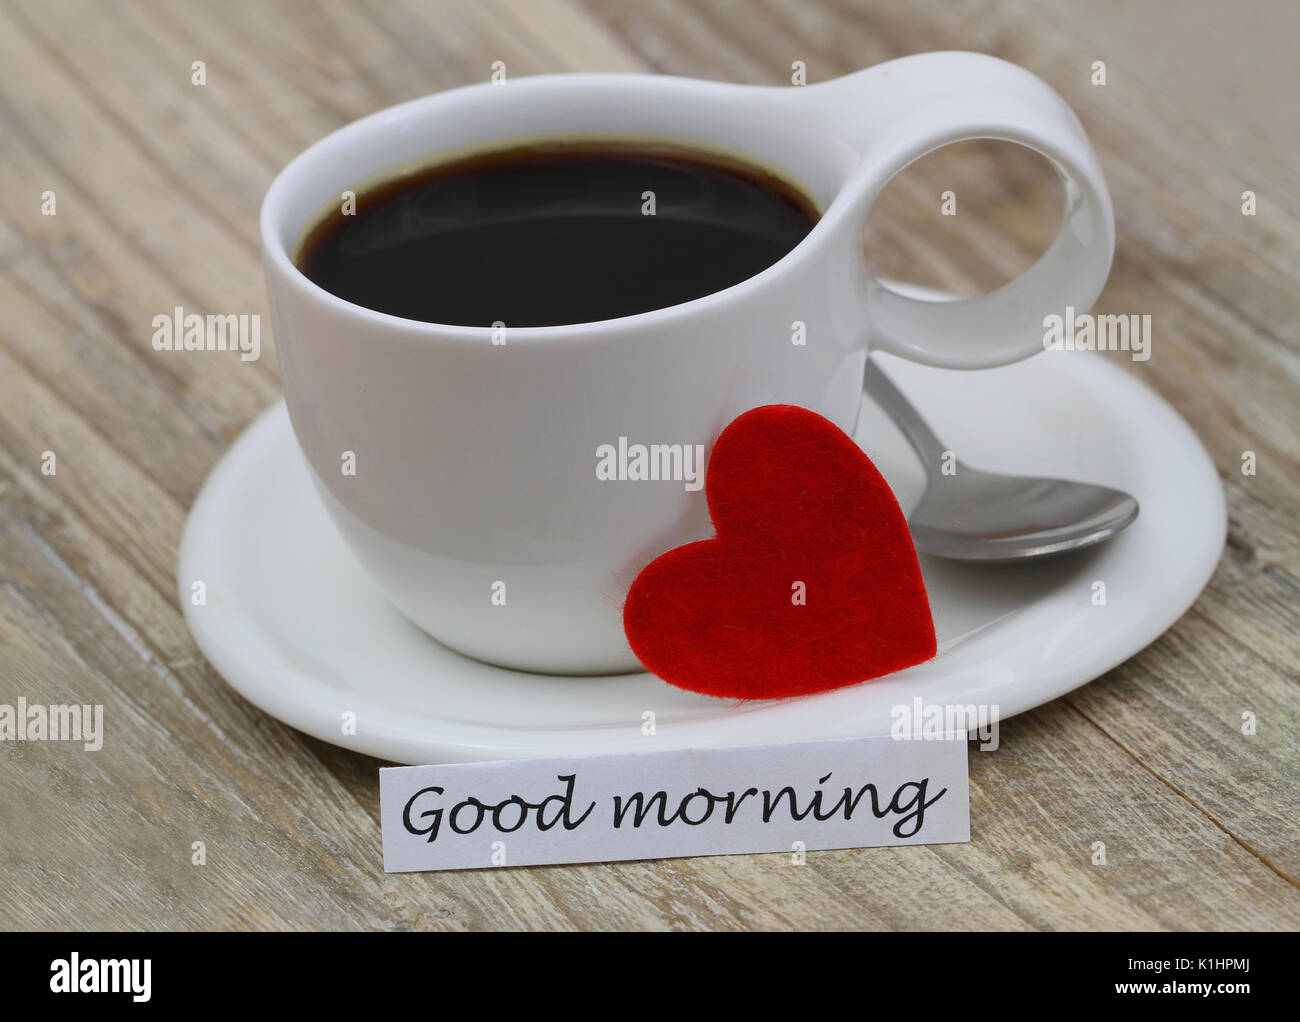 Good morning card with cup of black coffee and red heart Stock ...